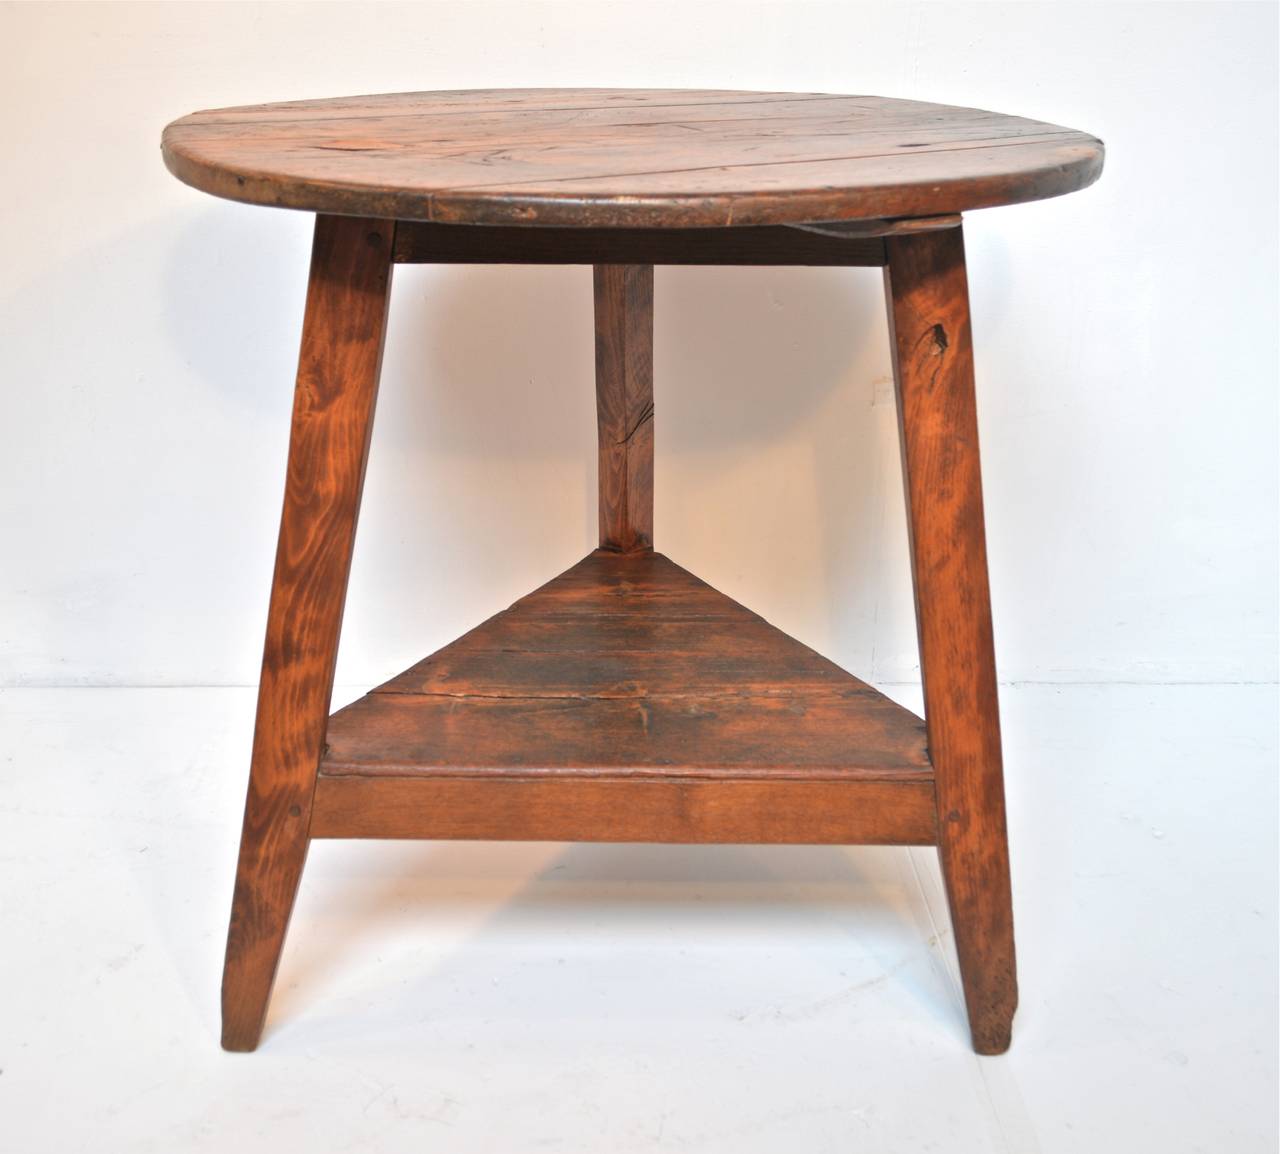 Late 19th century cricket table of pine and elm. The rustic yet chic lines of the useful table supply it with a great deal of versatility within any interior. Repairs to top and re-pegging of some joints along the way. 
Wear and age consistent with